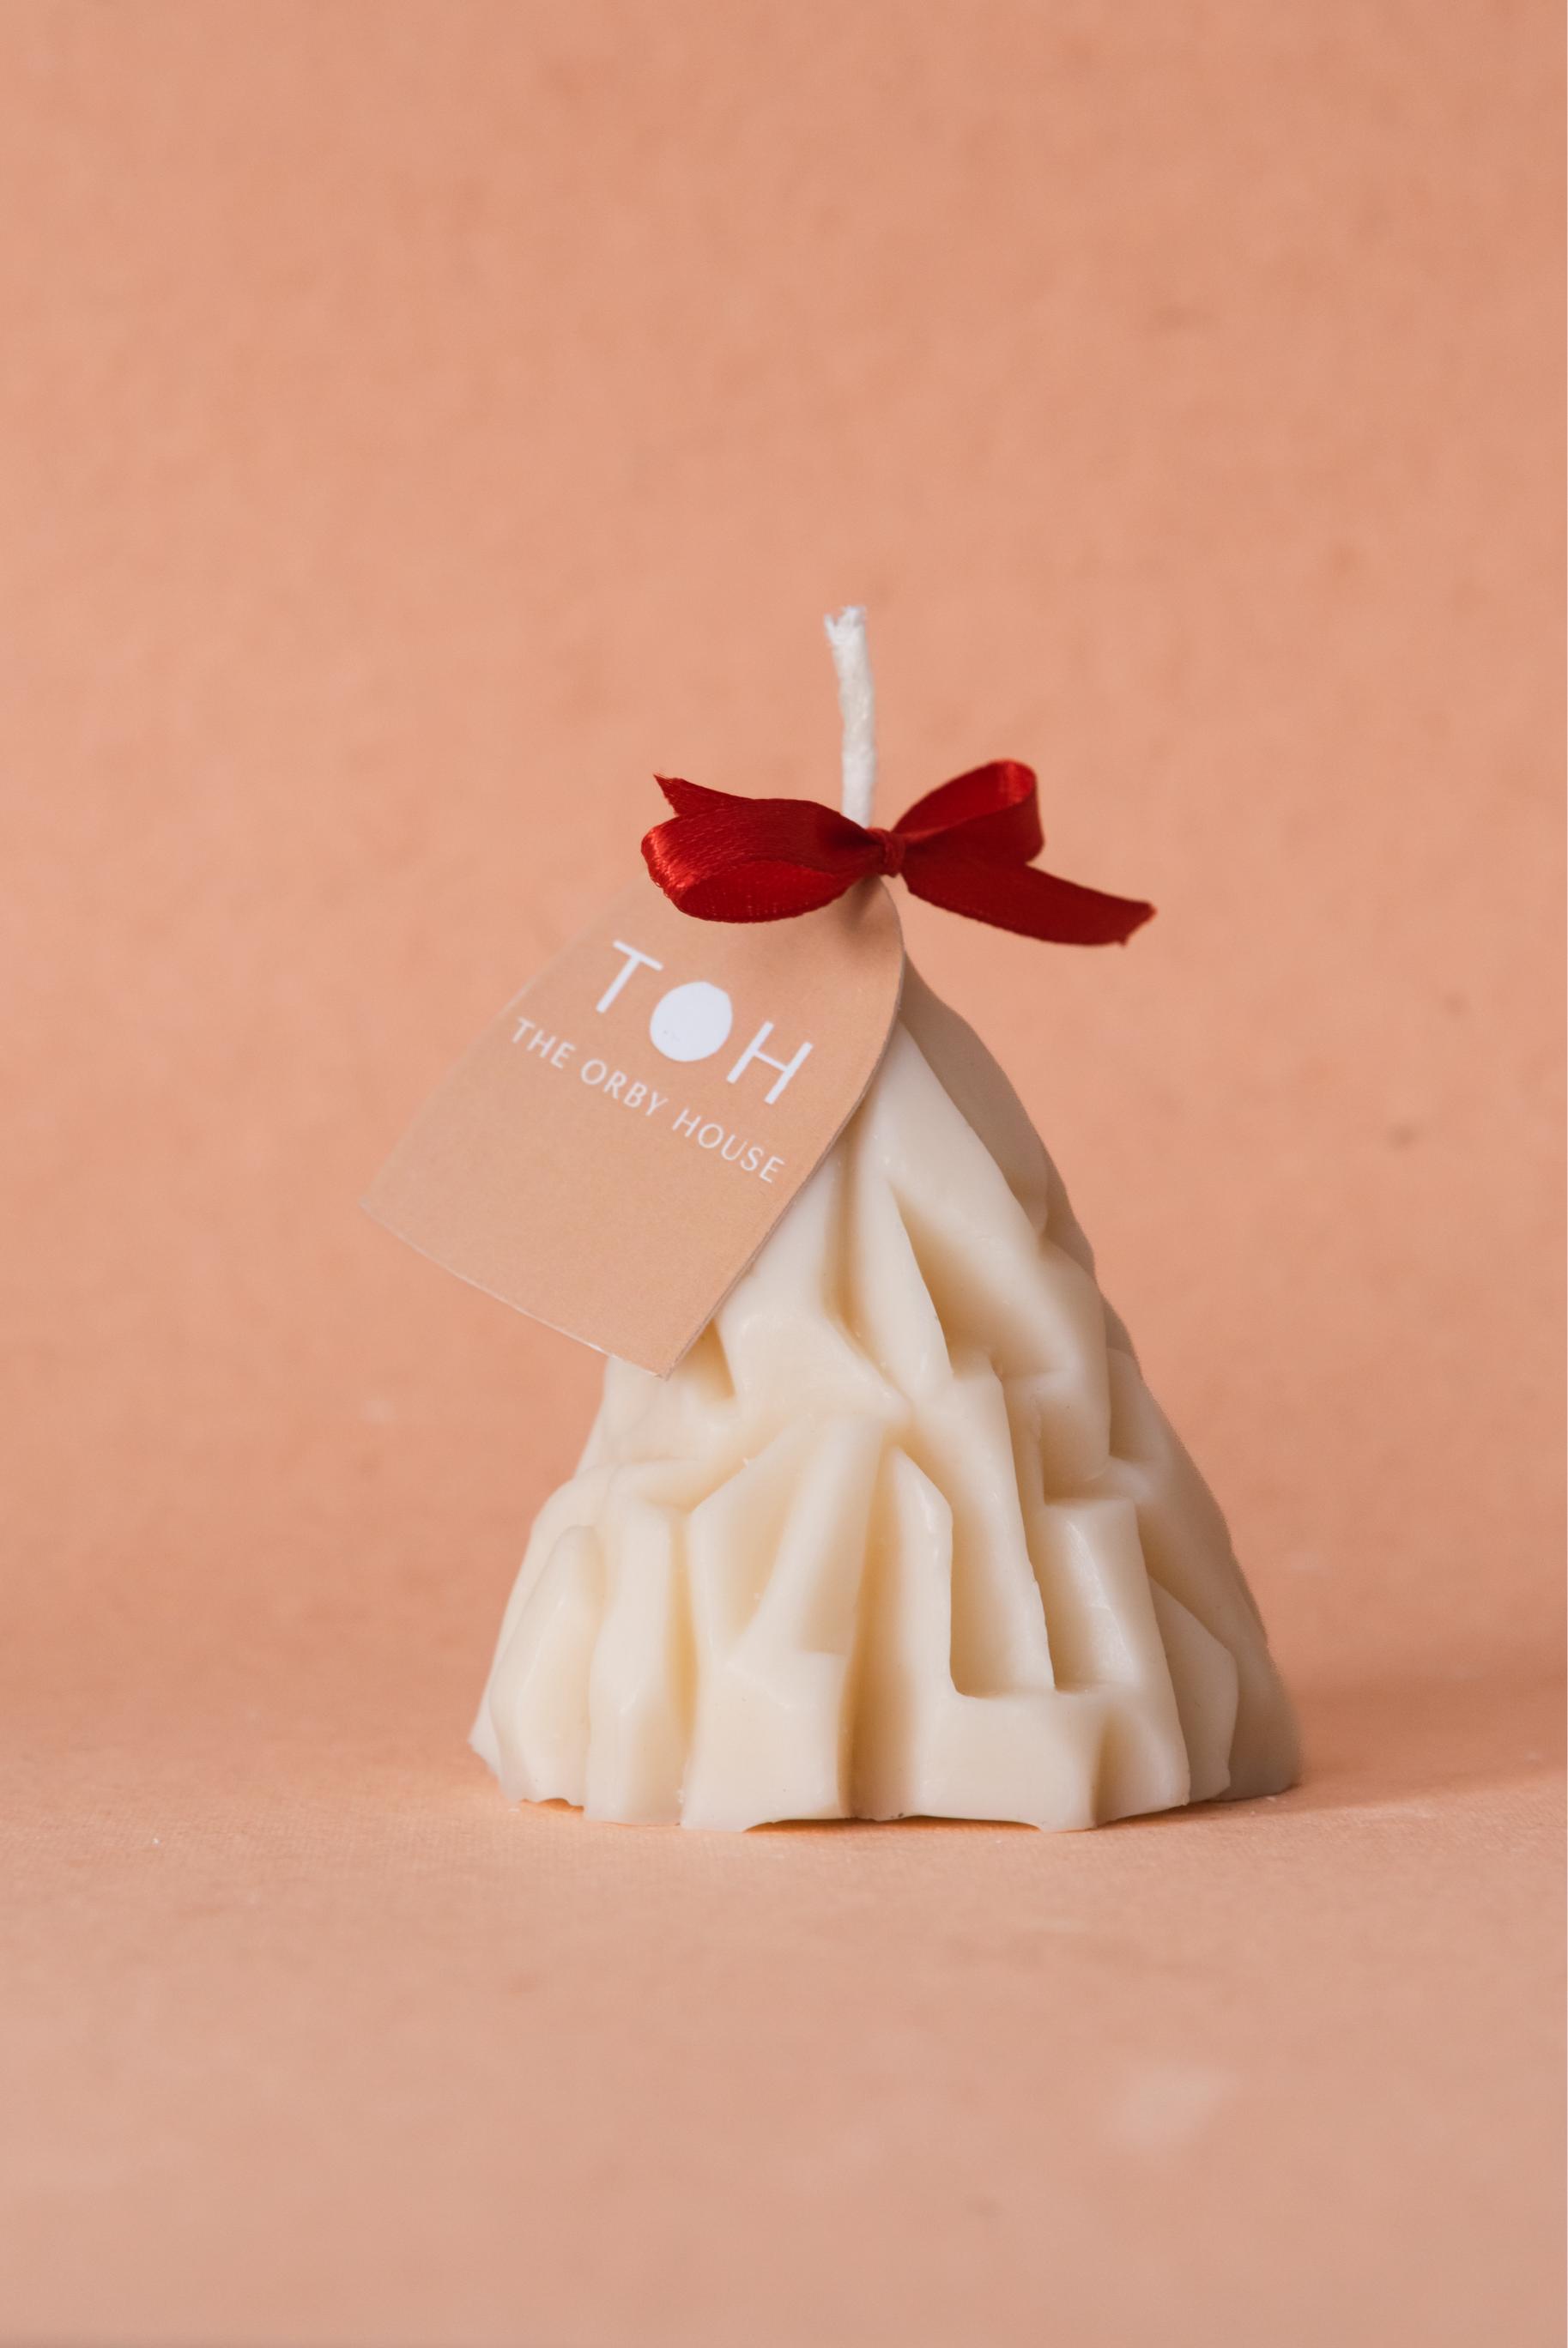 The Orby House Mountain Pillar Candle: Chamapgne Dream